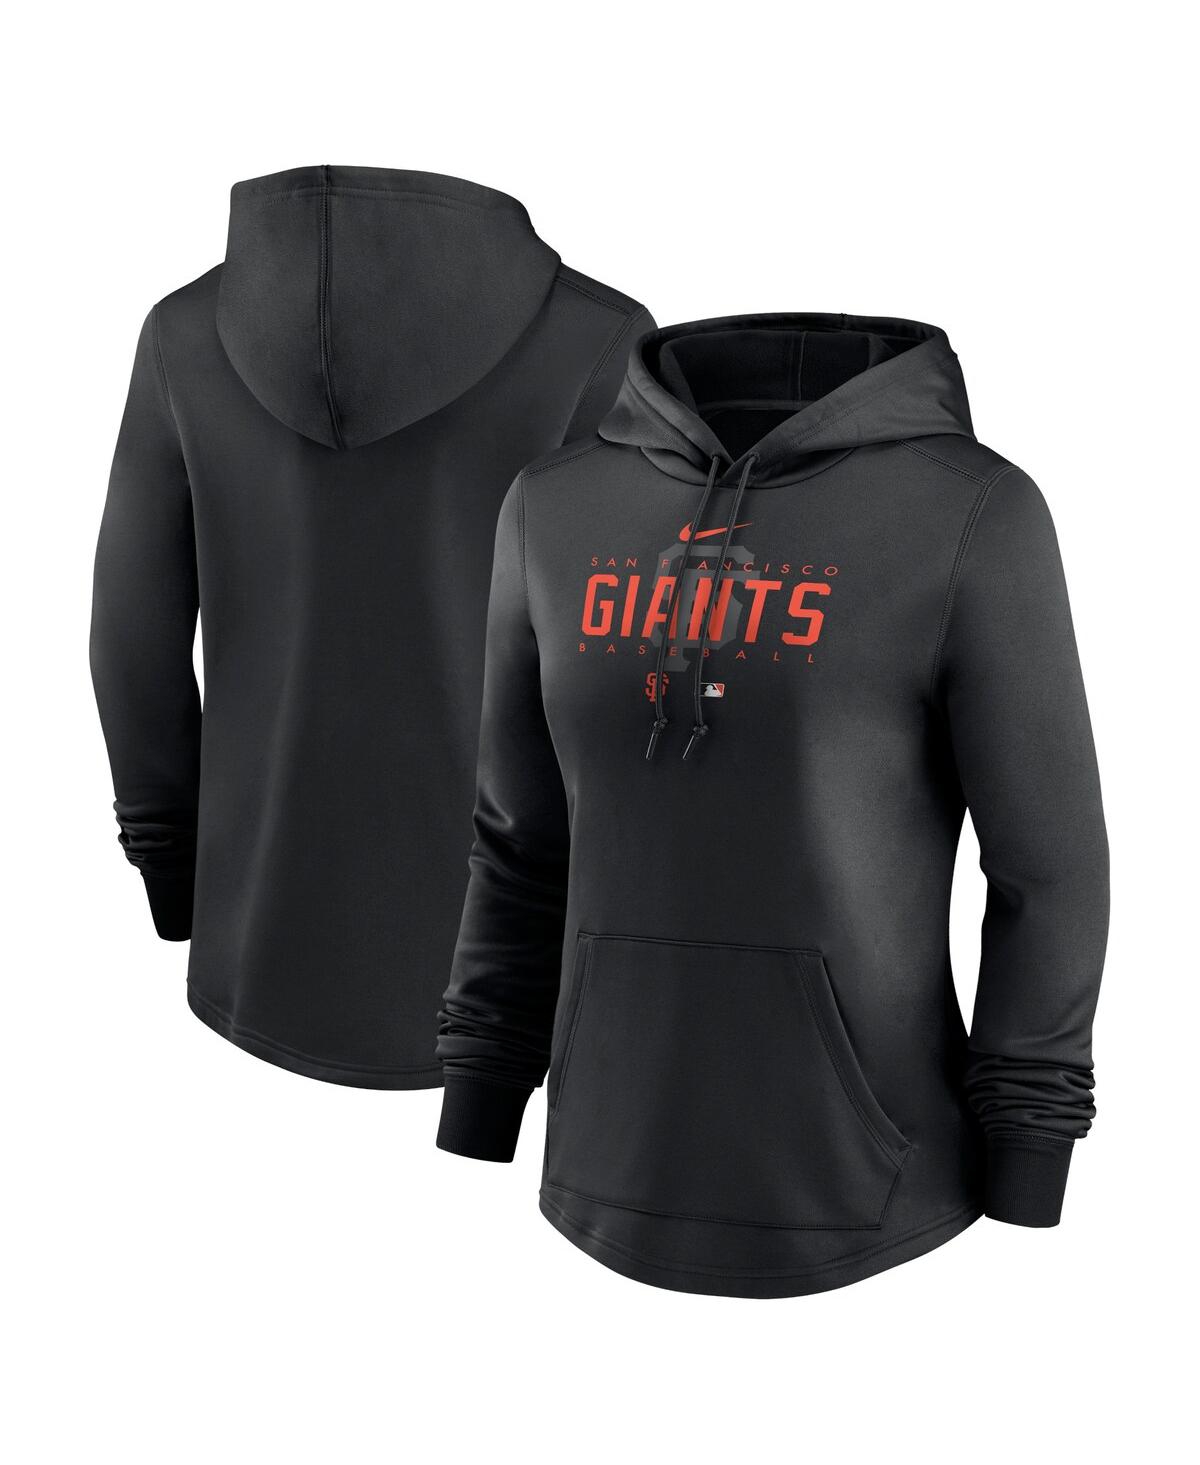 Shop Nike Women's  Black San Francisco Giants Authentic Collection Pregame Performance Pullover Hoodie